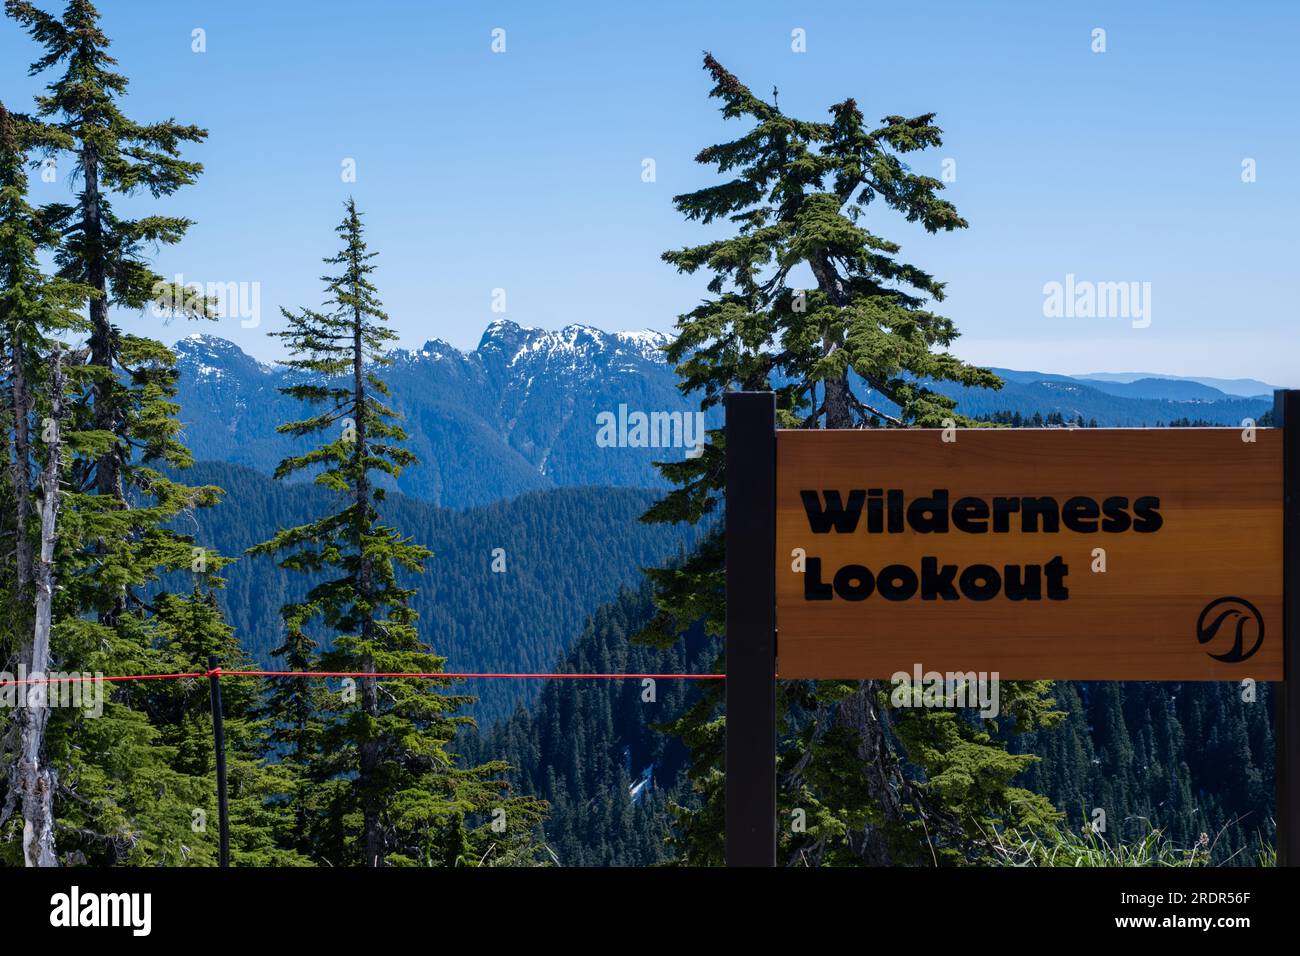 Grouse Mountain Wilderness Lookout Stock Photo